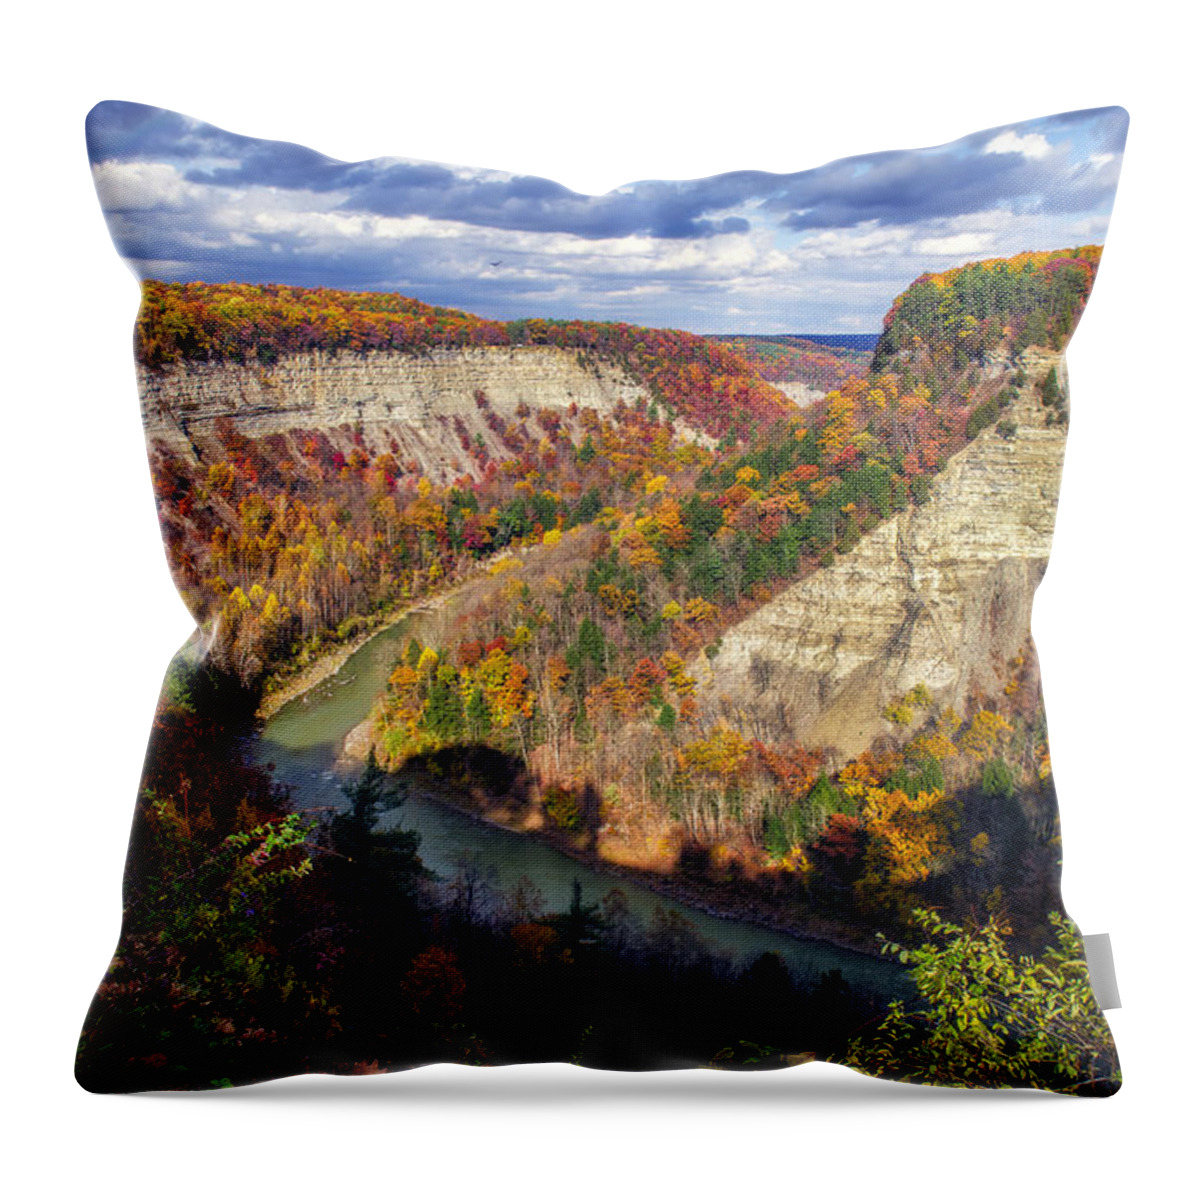 Letchworth State Park Throw Pillow featuring the photograph Grand Canyon Of The East by Mark Papke